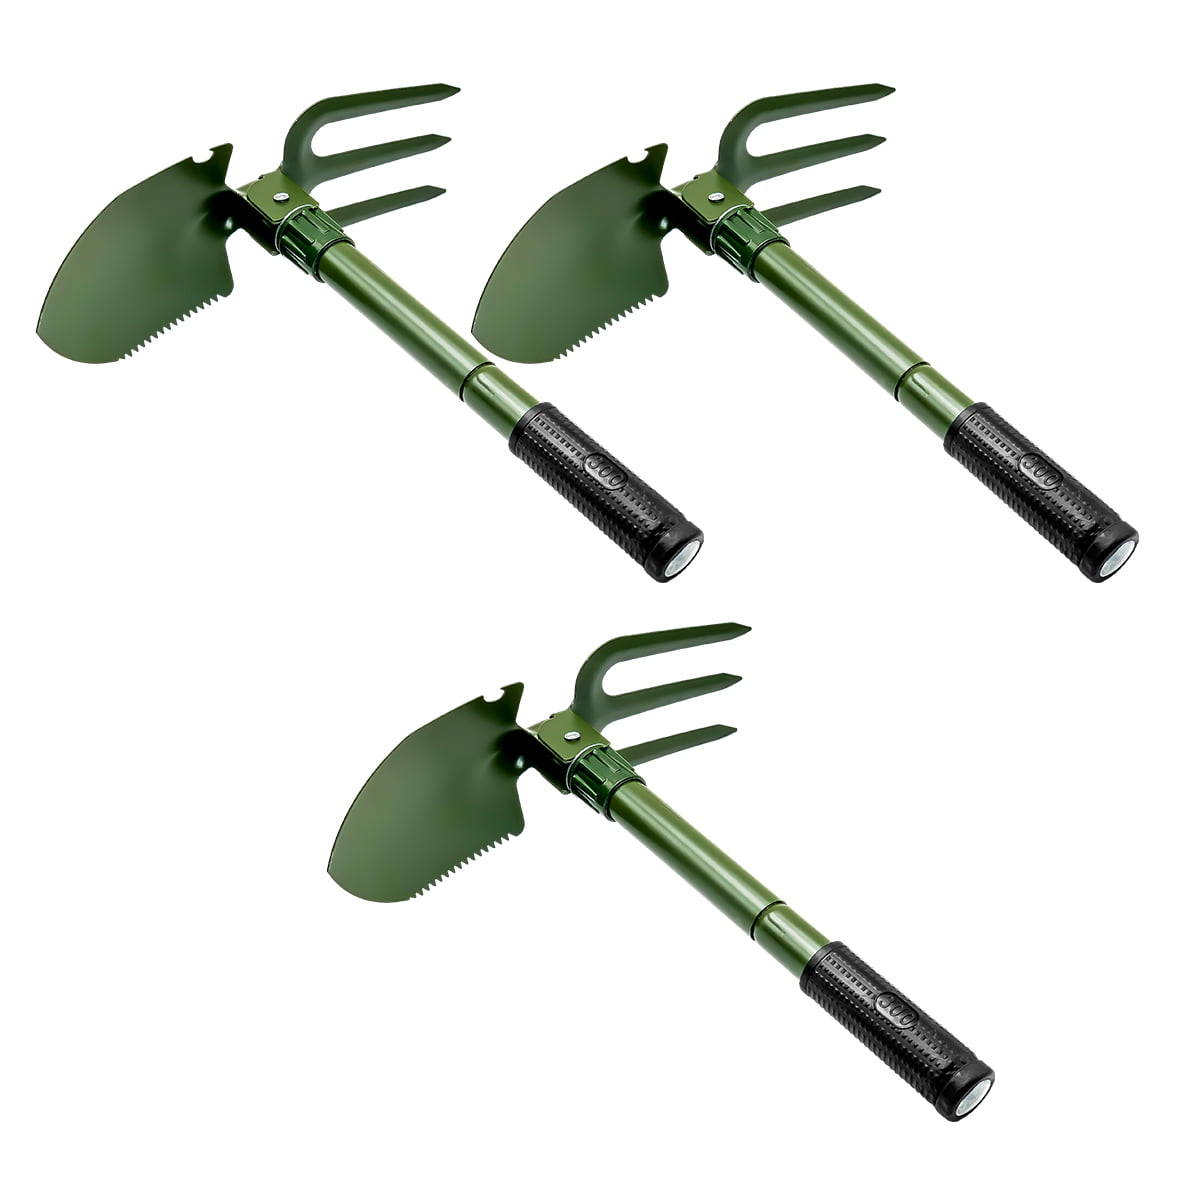 Includes Carrying Pouch with Loop FactorDuty 1 Pack Folding Digger Cultivator Shovel Entrenching Trowel Digging Hoe Tool with Steel Rugged Edge Blade Survival Spade for Camping Gardening 